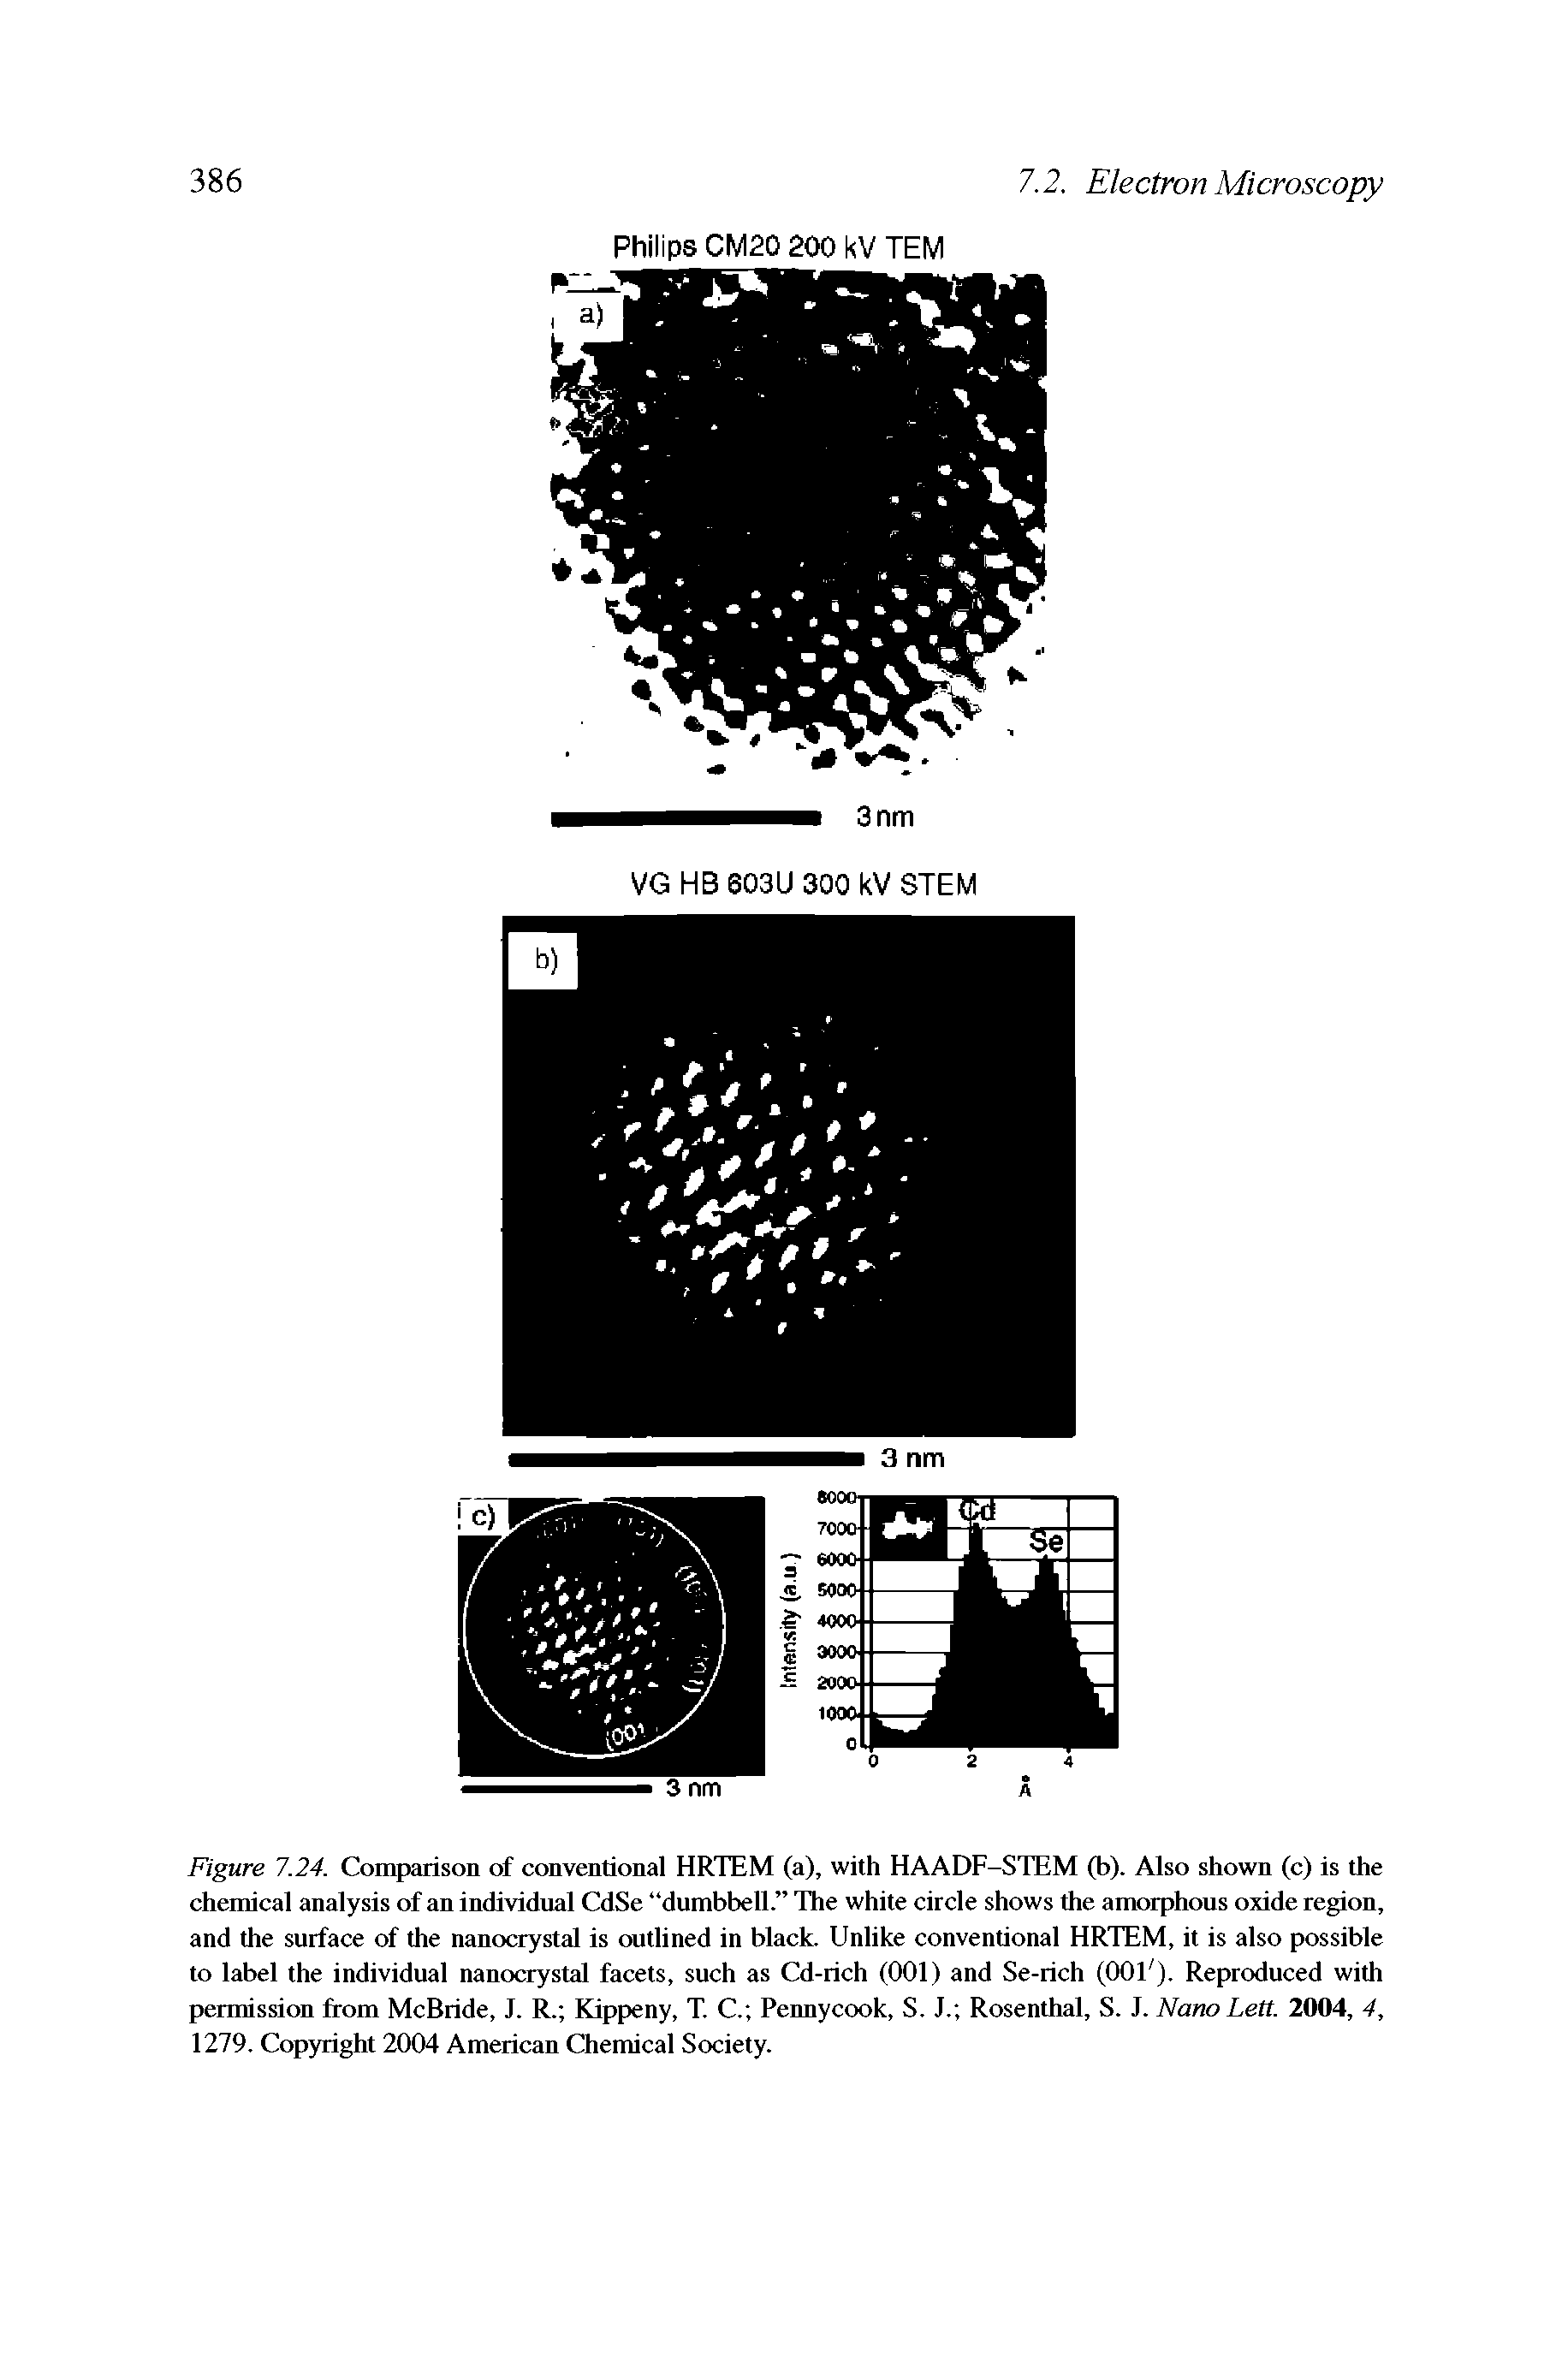 Figure 7.24. Comparison of conventional HRTEM (a), with HAADF-STEM (b). Also shown (c) is the chemical analysis of an individual CdSe dumbbell. The white circle shows the amorphous oxide region, and the surface of the nanocrystal is outlined in black. Unlike conventional HRTEM, it is also possible to label the individual nanocrystal facets, such as Cd-rich (001) and Se-rich (001 ). Reproduced with permission from McBride, J. R. Kippeny, T. C. Pennycook, S. J. Rosenthal, S. J. Nano Lett. 2004, 4, 1279. Copyright 2004 American Chemical Society.